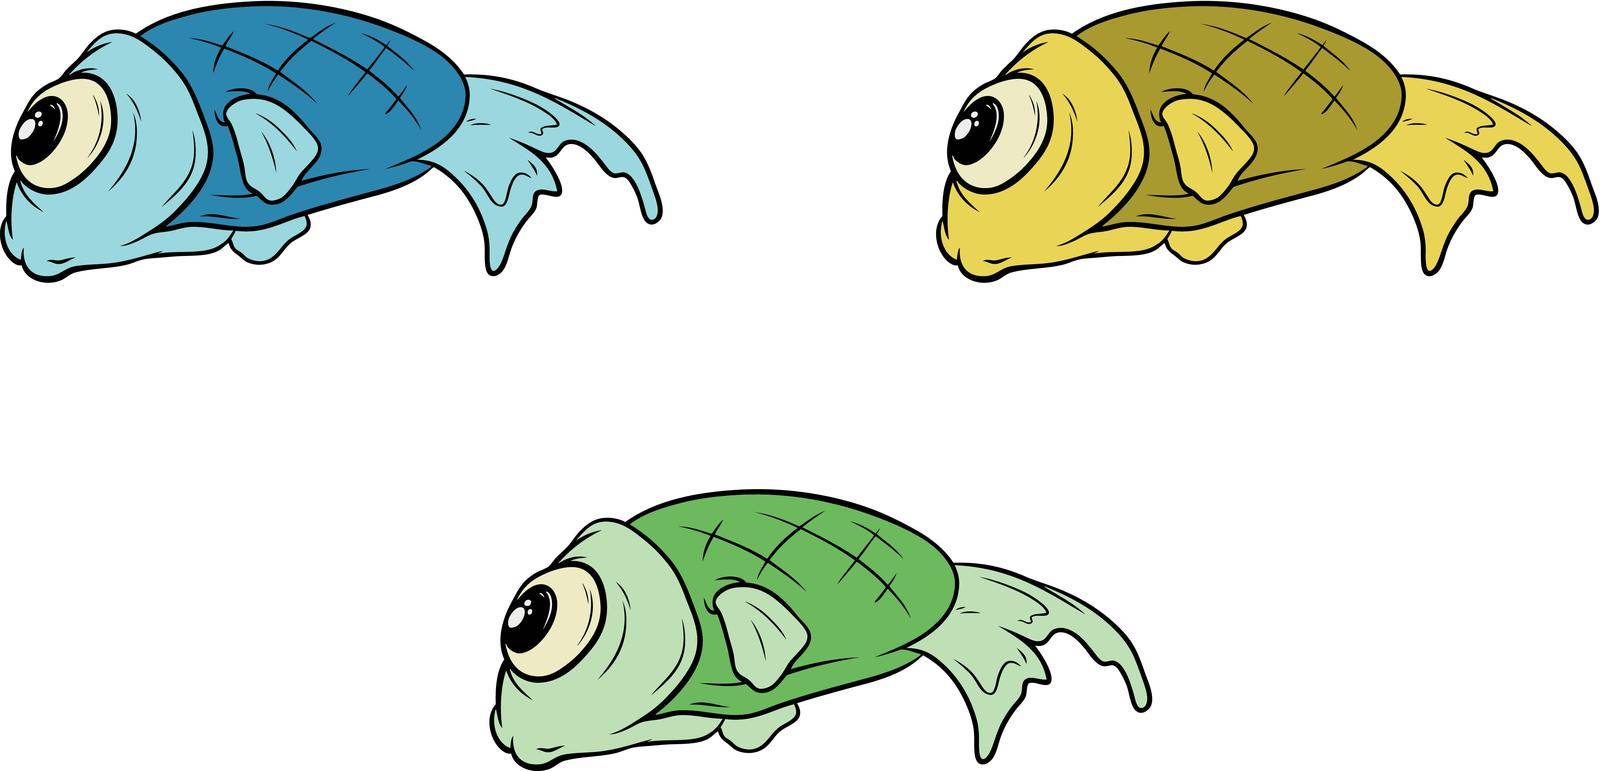 A vector illustration of cartoon set of different fish